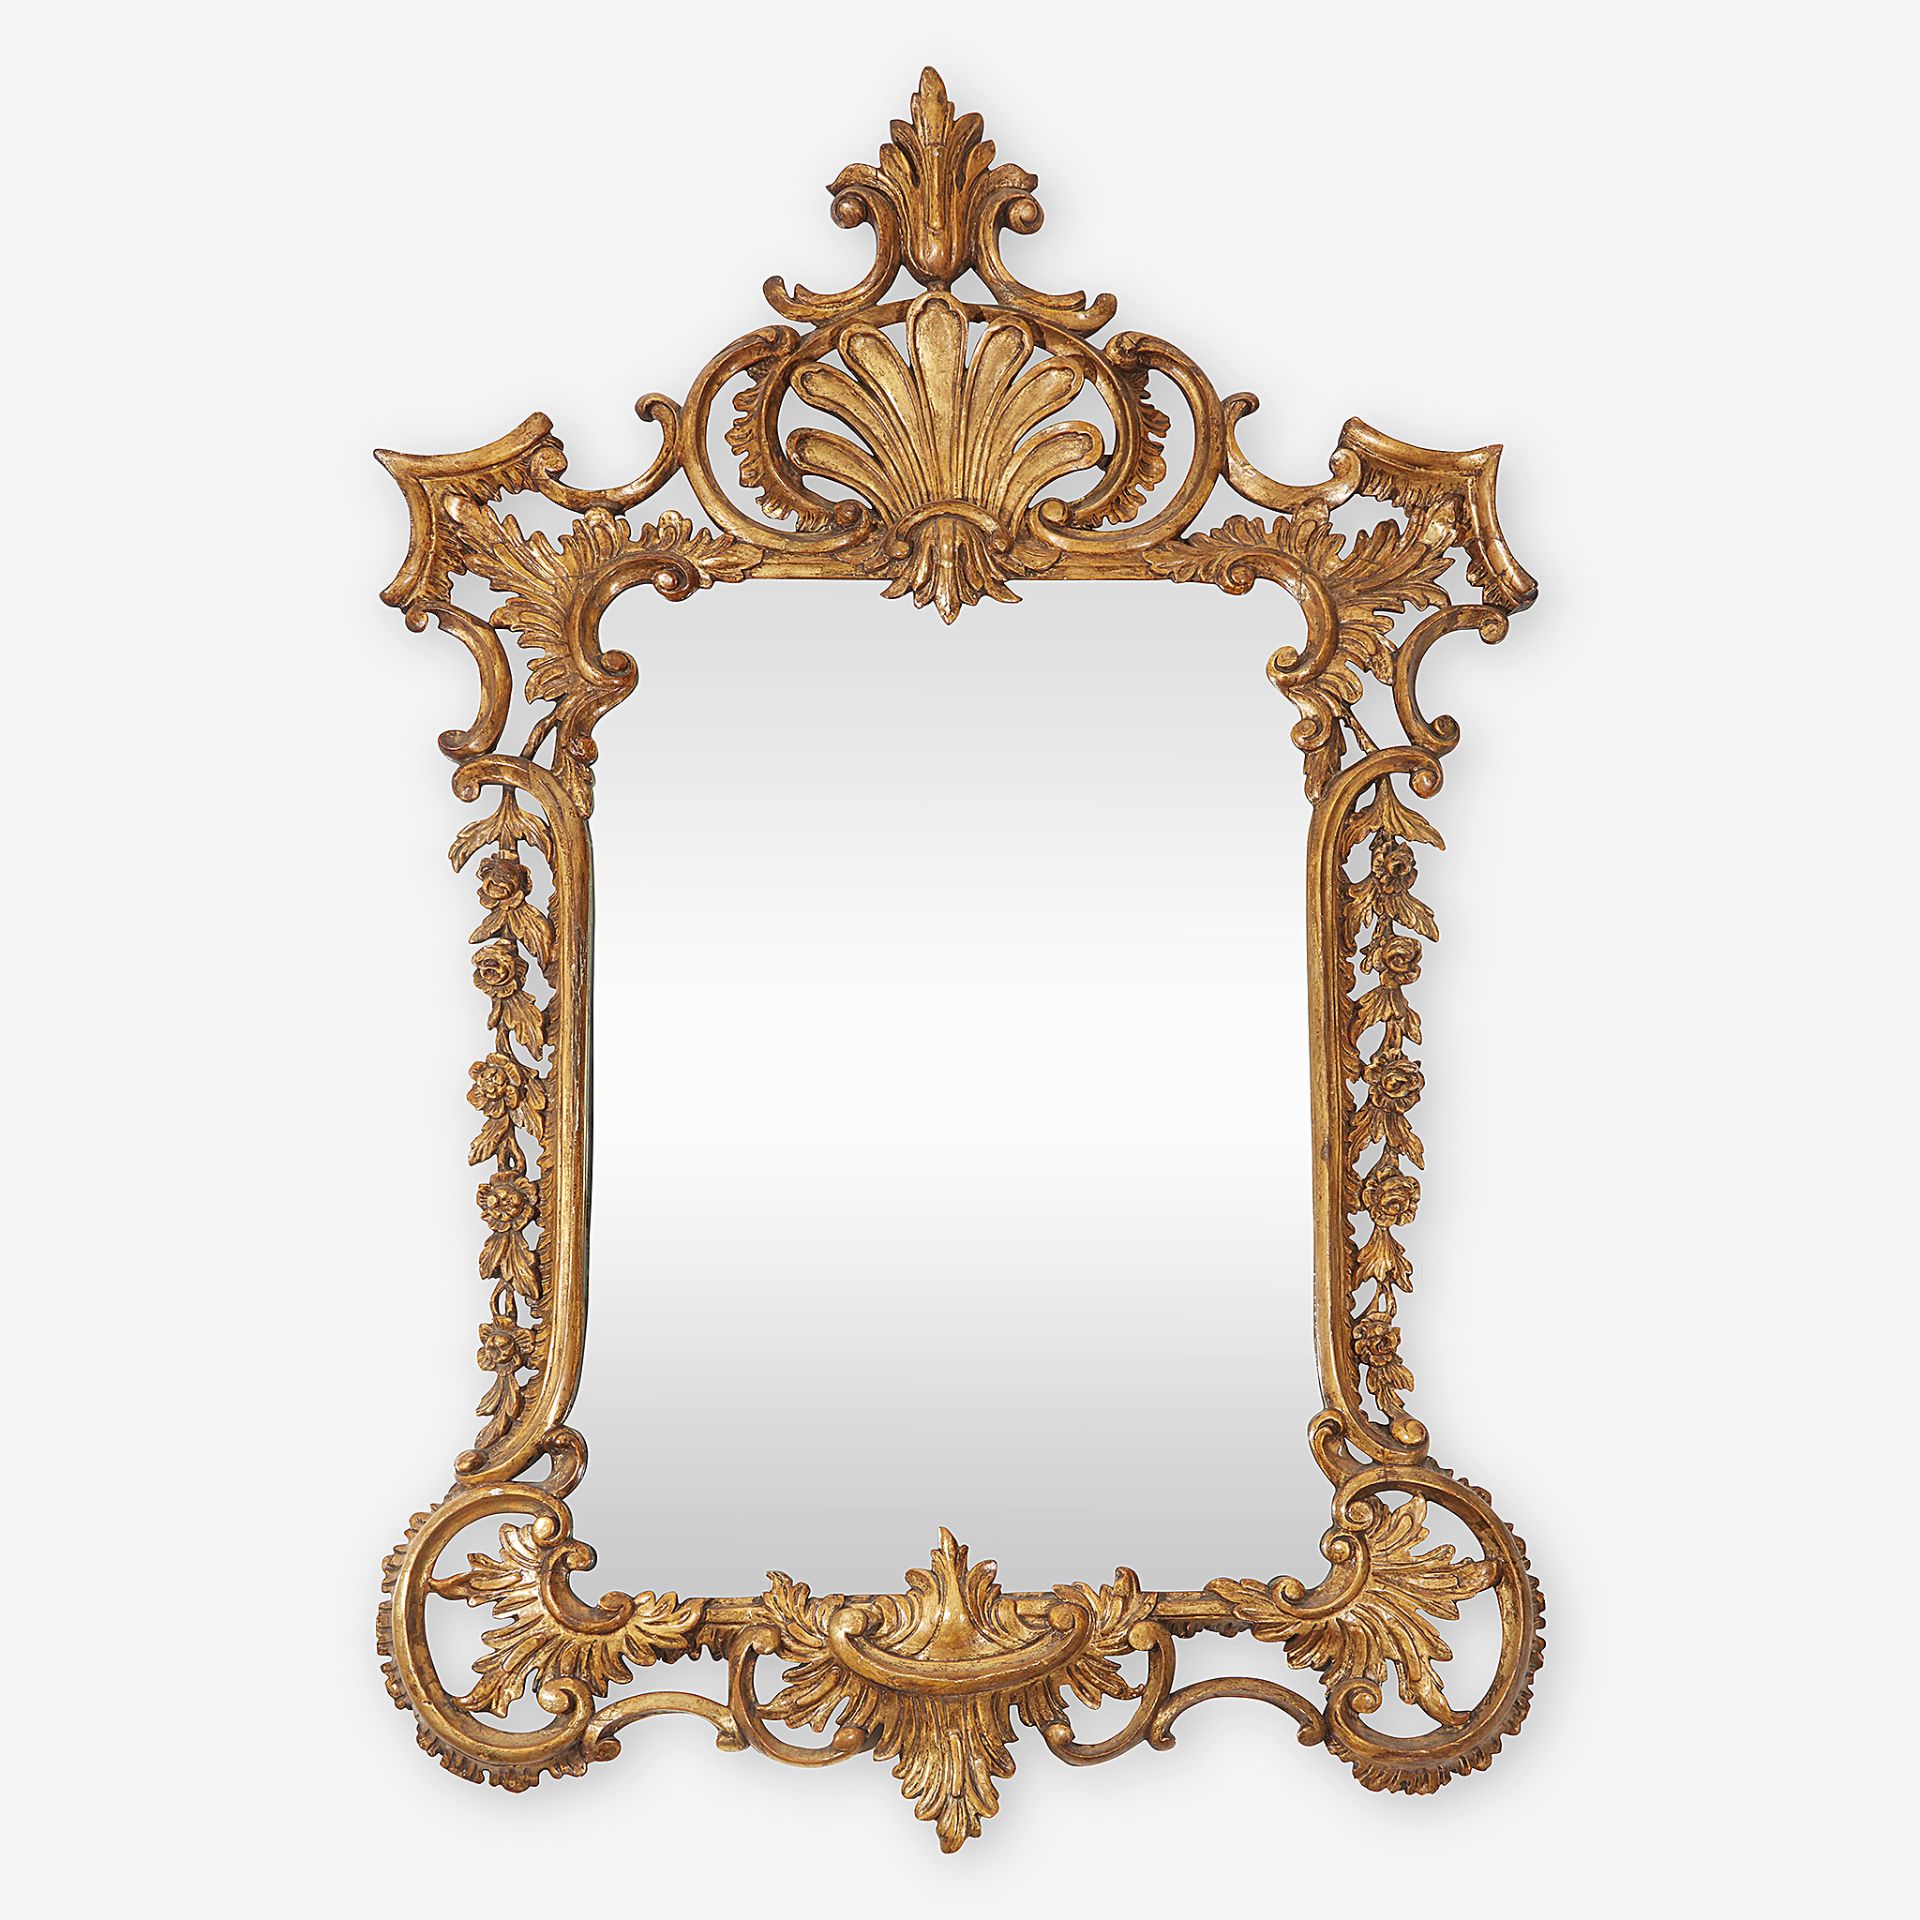 A Continental Rococo carved pine giltwood mirror, Probably German, 18th century